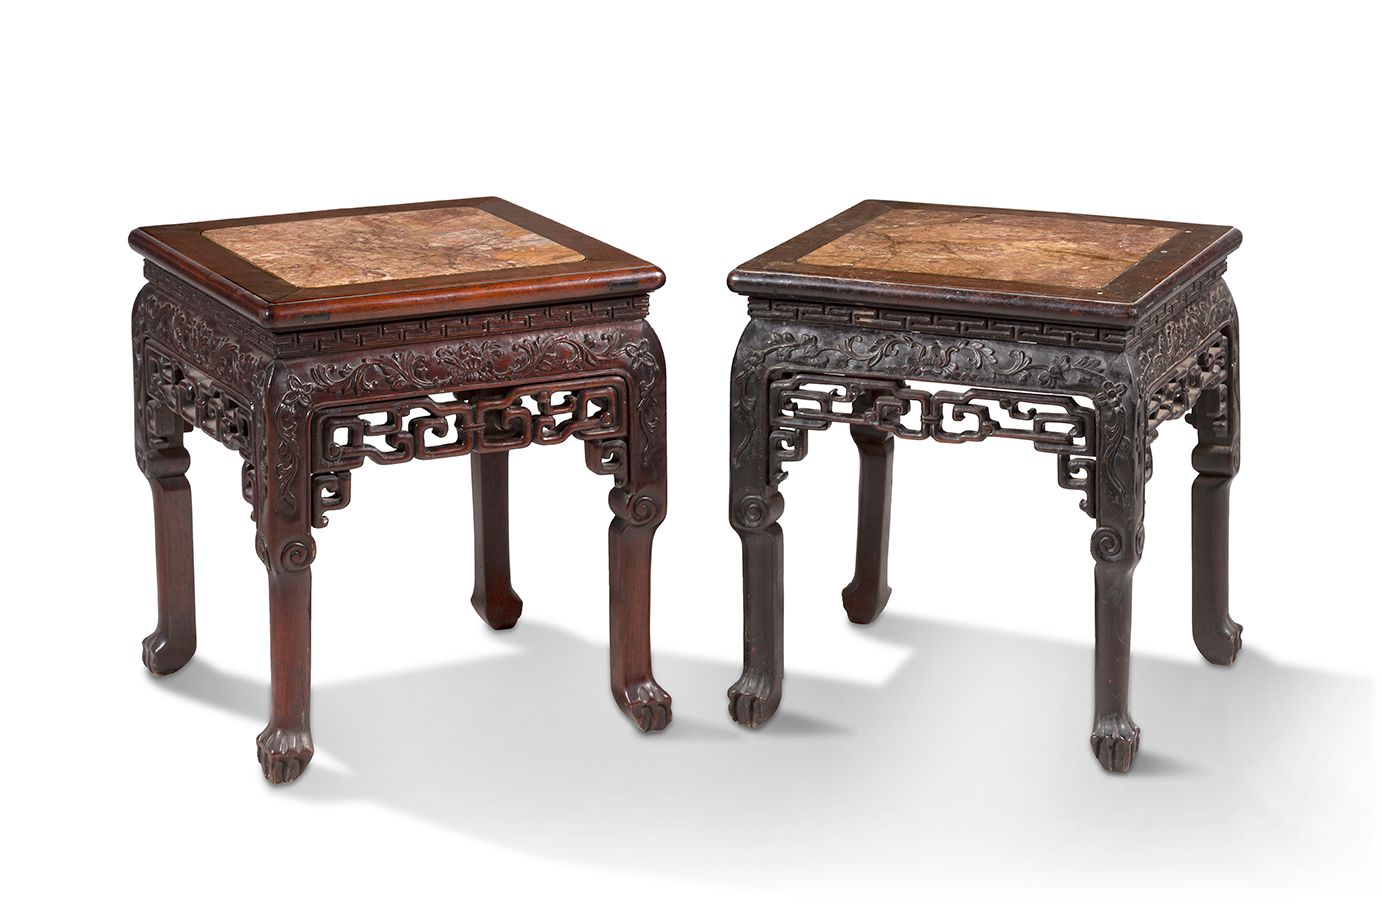 CHINE VERS 1900 Pair of small sellettes
In carved wood with openwork floral moti&hellip;